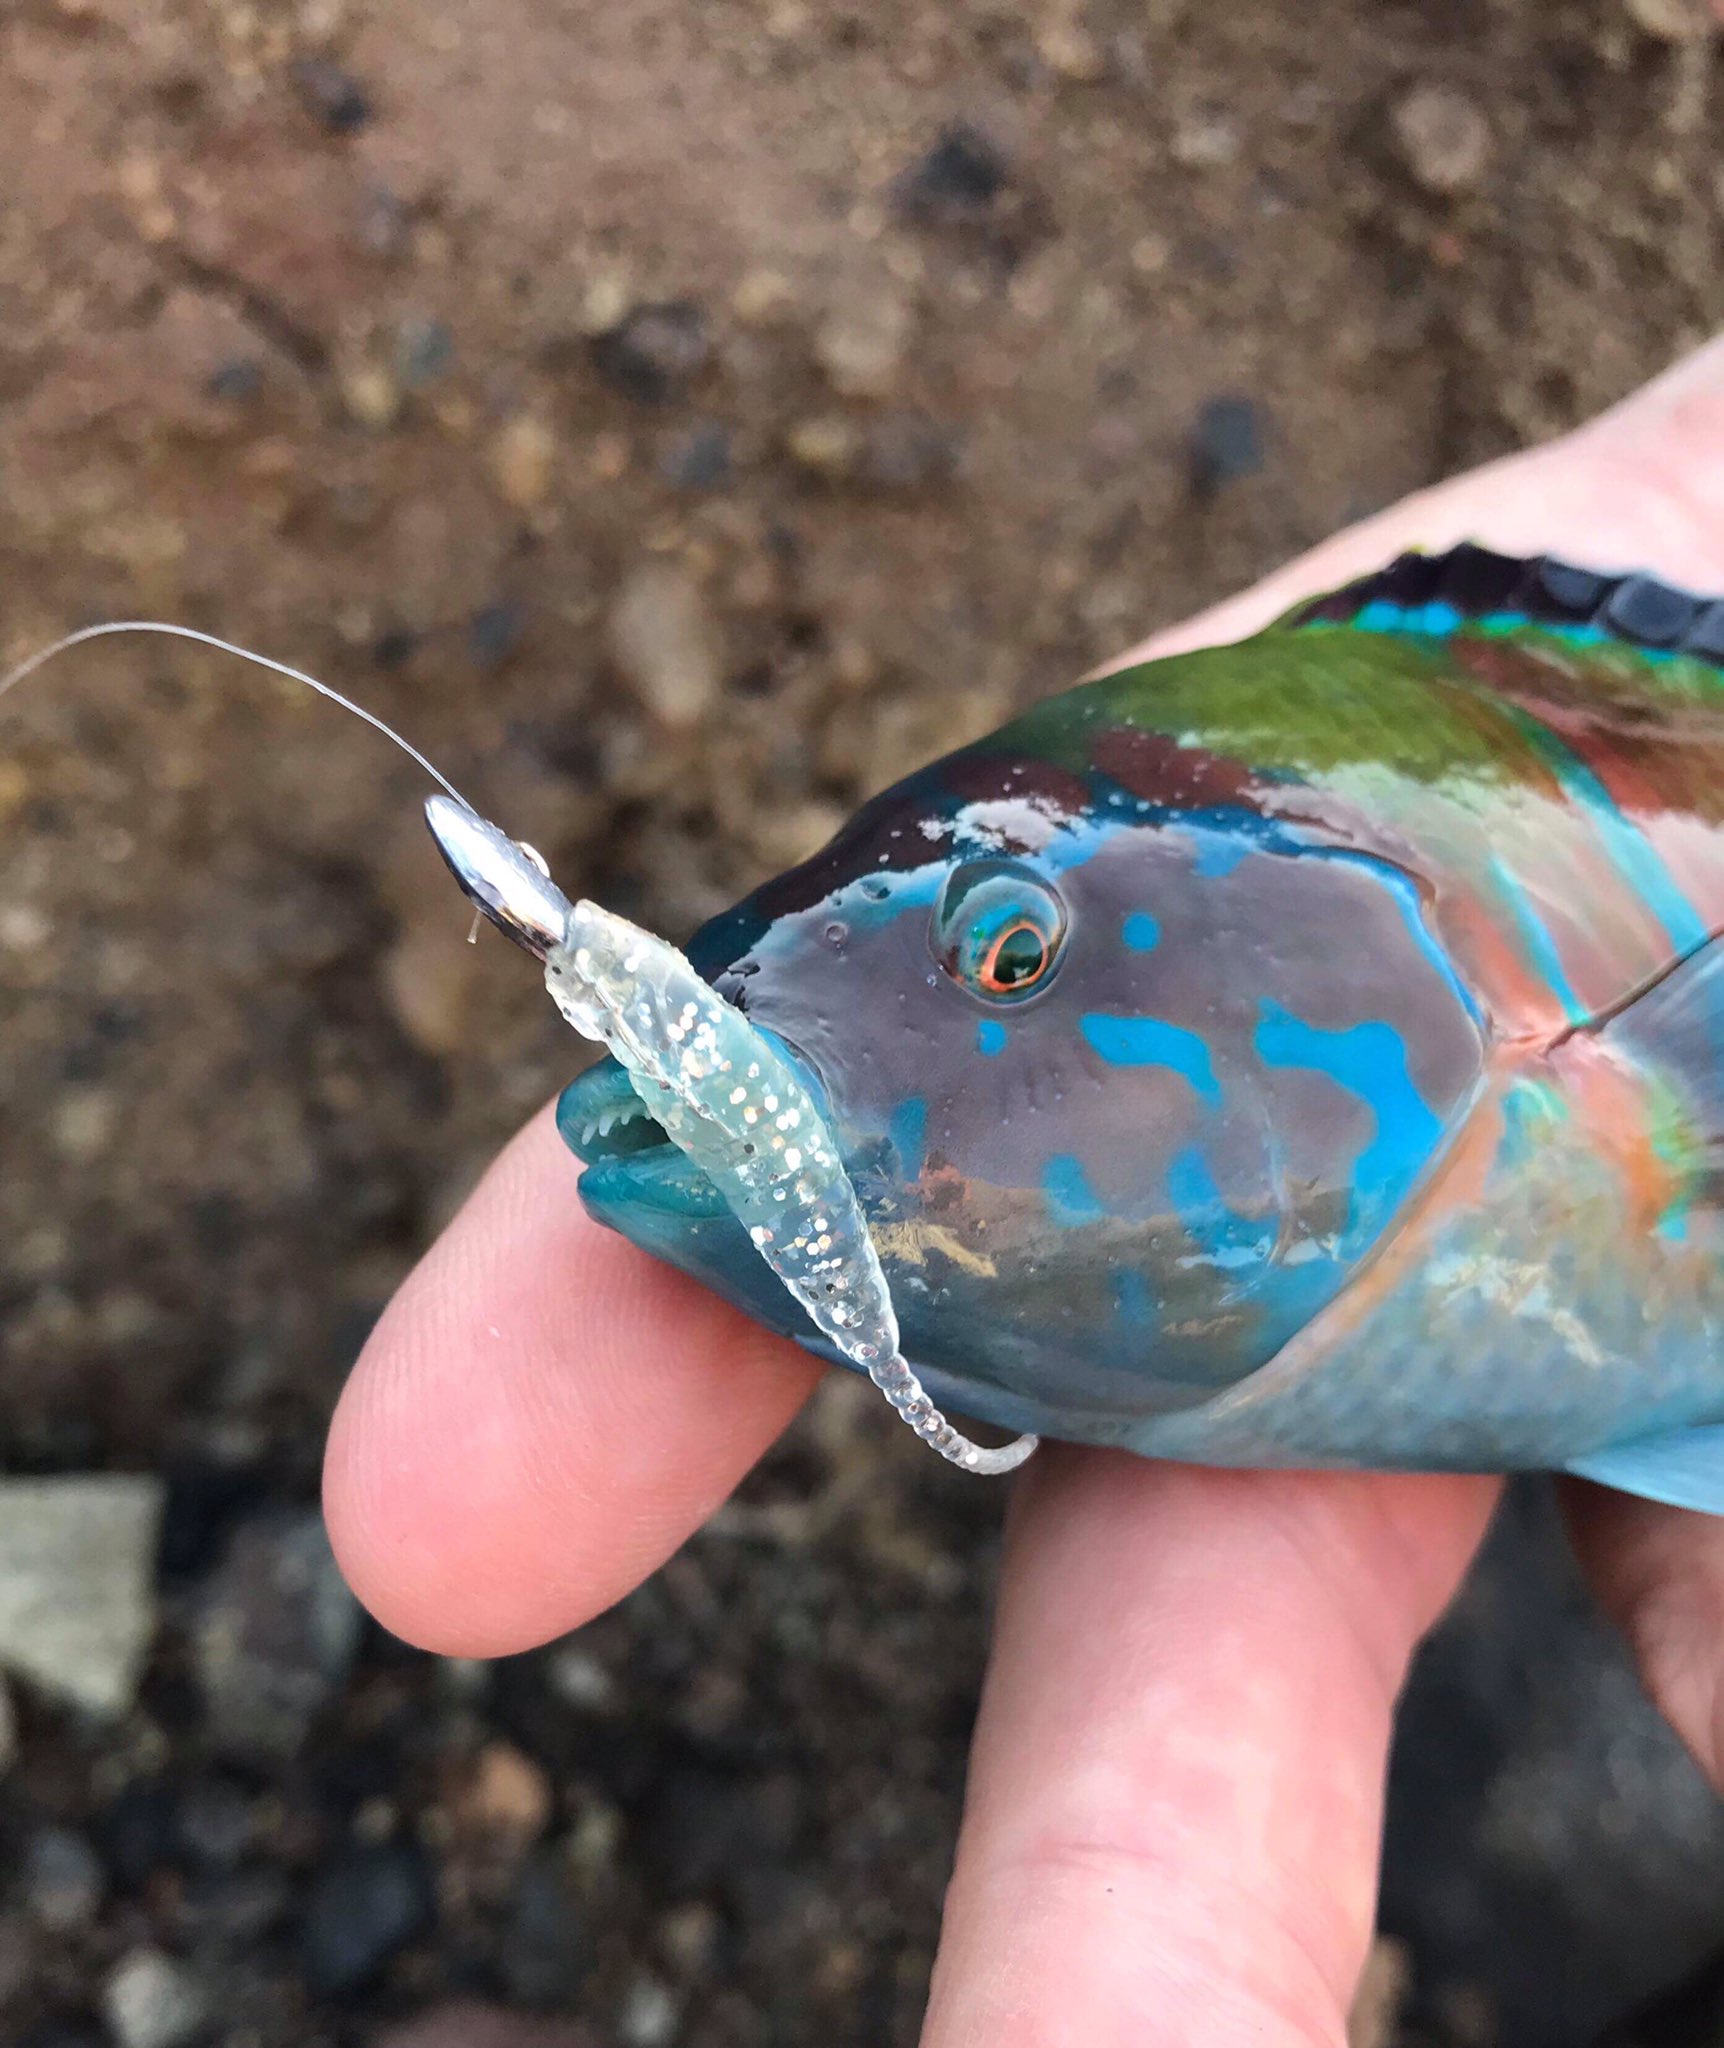 Dogtooth Tuna Company on X: Ornate Wrasse caught on our Mebaru Ing LRF  lures. £1.99 a pack of 7 with free delivery! #seaangling #tenerife  #lurecaught #ornatewrasse #lrf #fishing #angling #anglingdirect  #anglingtimes #seaanglermagazine #